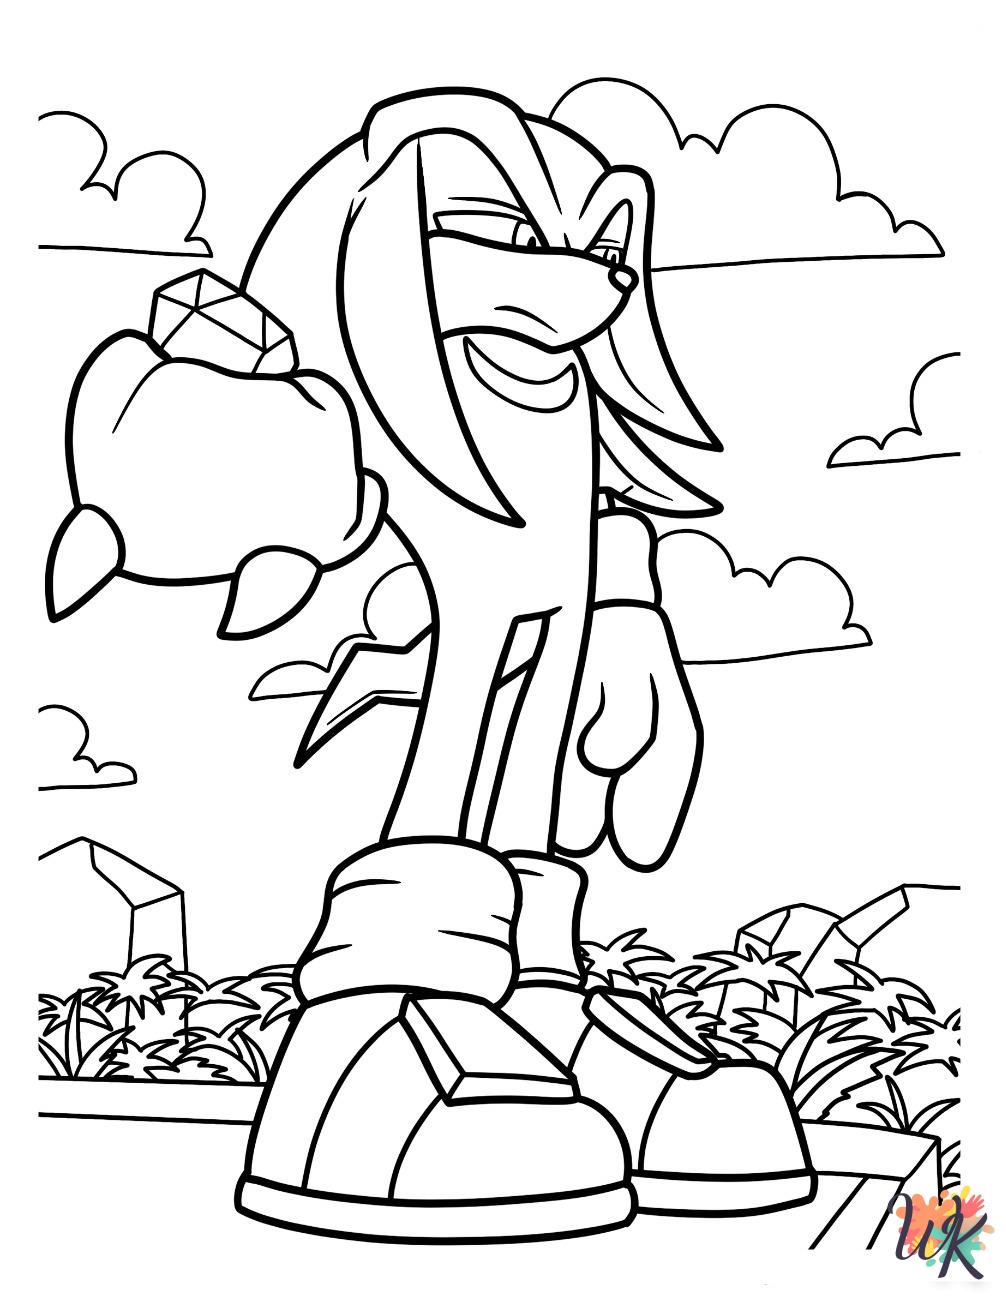 merry Knuckles coloring pages